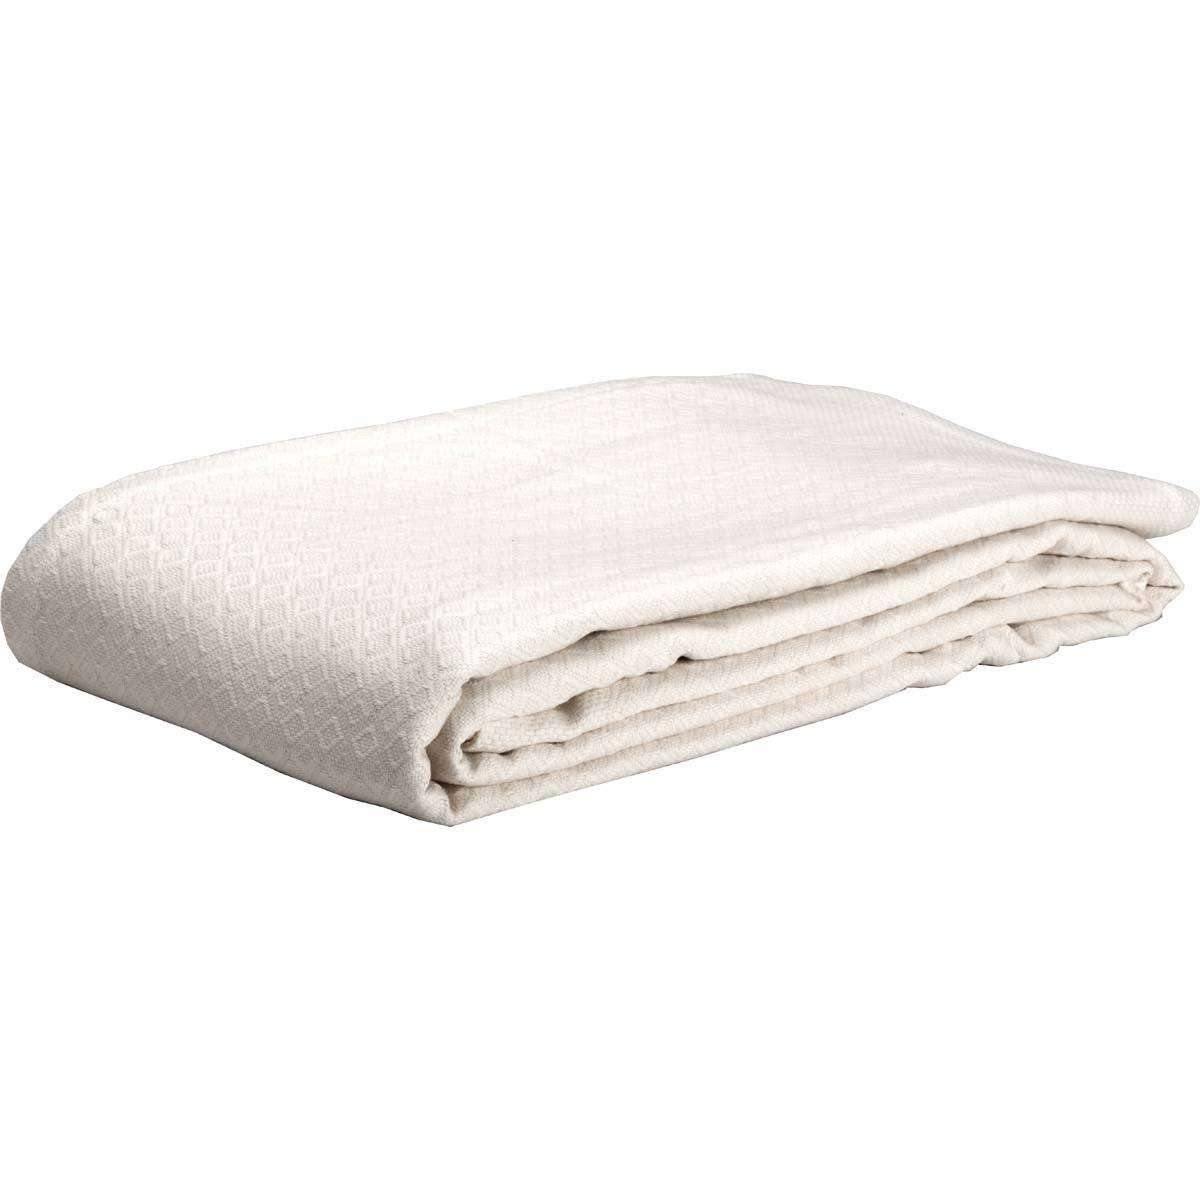 Serenity Creme Cotton Woven Blanket VHC Brands folded